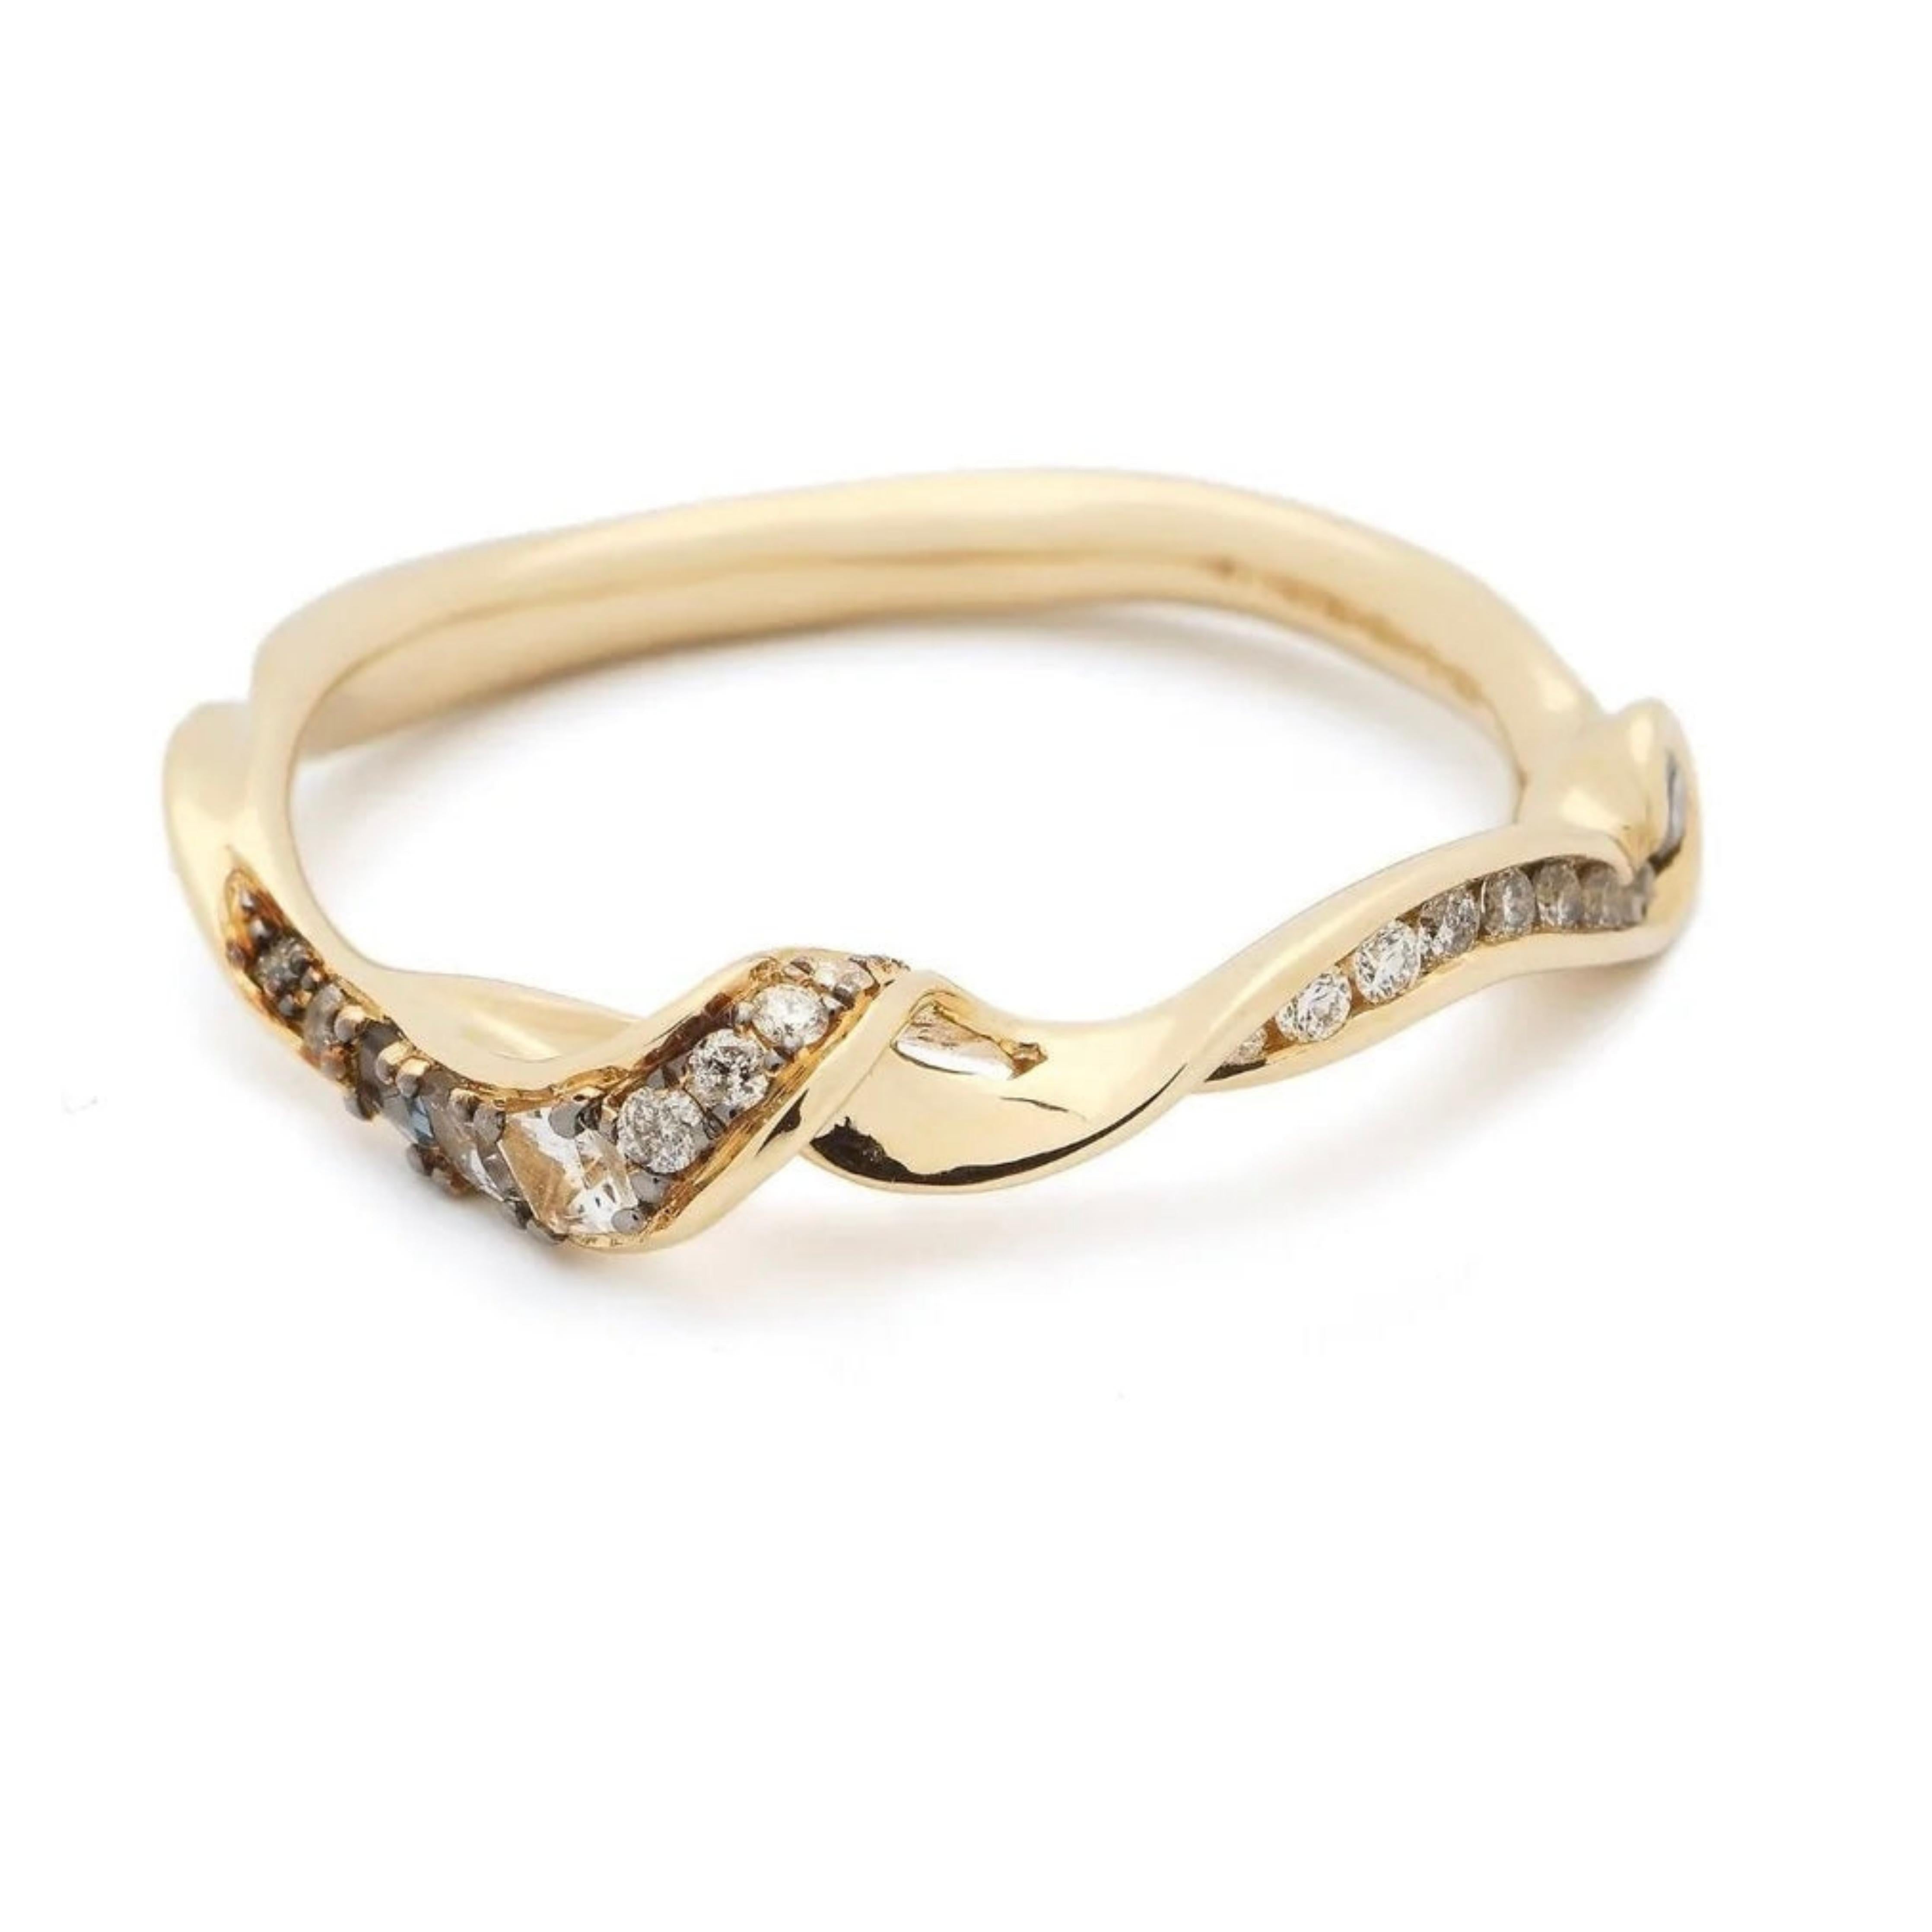 Bibi van der Velden Inhale Stackable Ring A Stackable Ring crafted from 18K white gold with pale yellow tones and enhanced with white, grey, and blue toned diamond and spinels to form an organic shape inspired by smoke. Photo shown from the side.